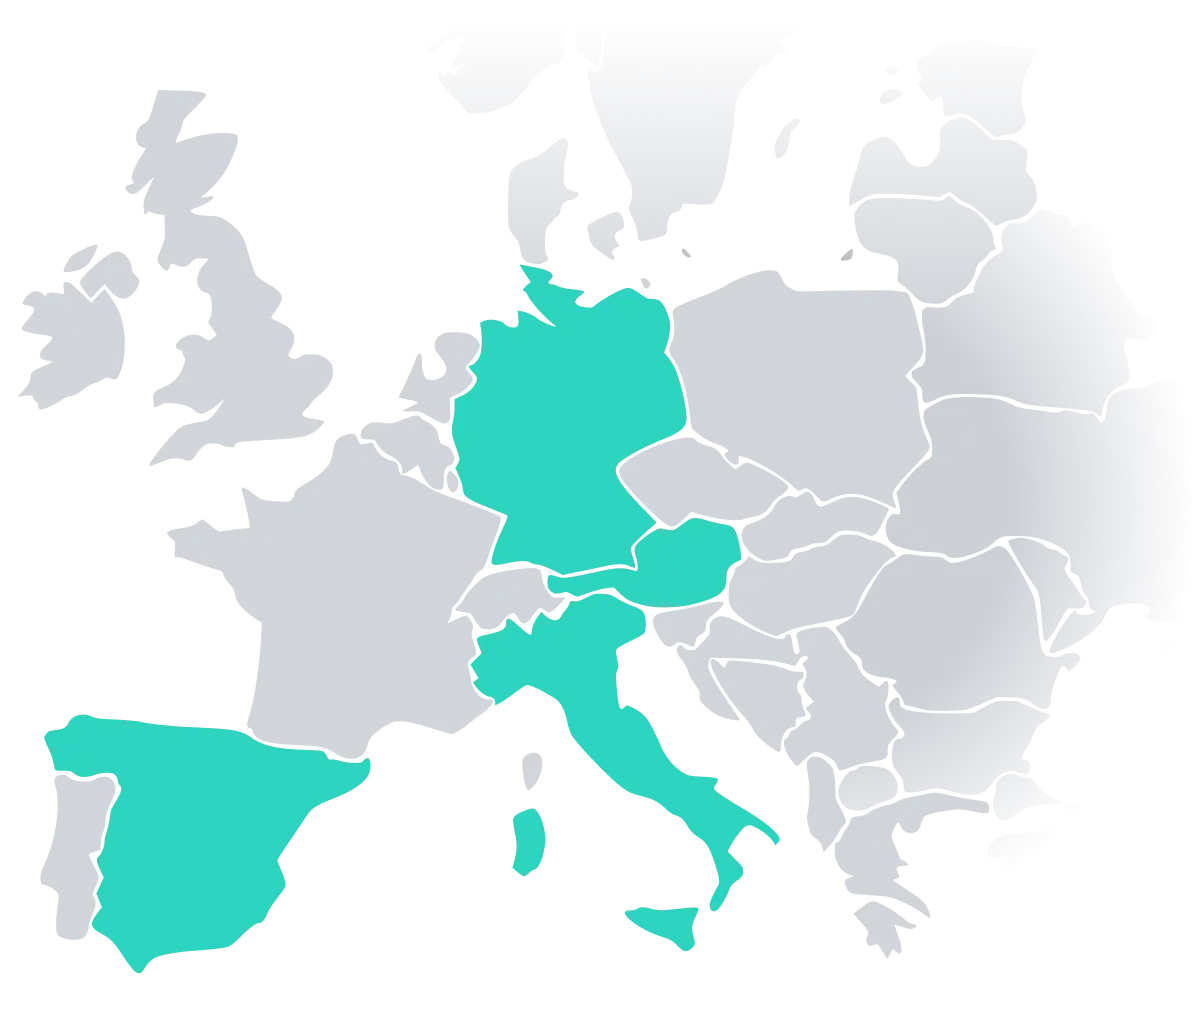 Map of Europe with Austria, Germany, Spain and Italy marked green for POS compliance by fiskaly